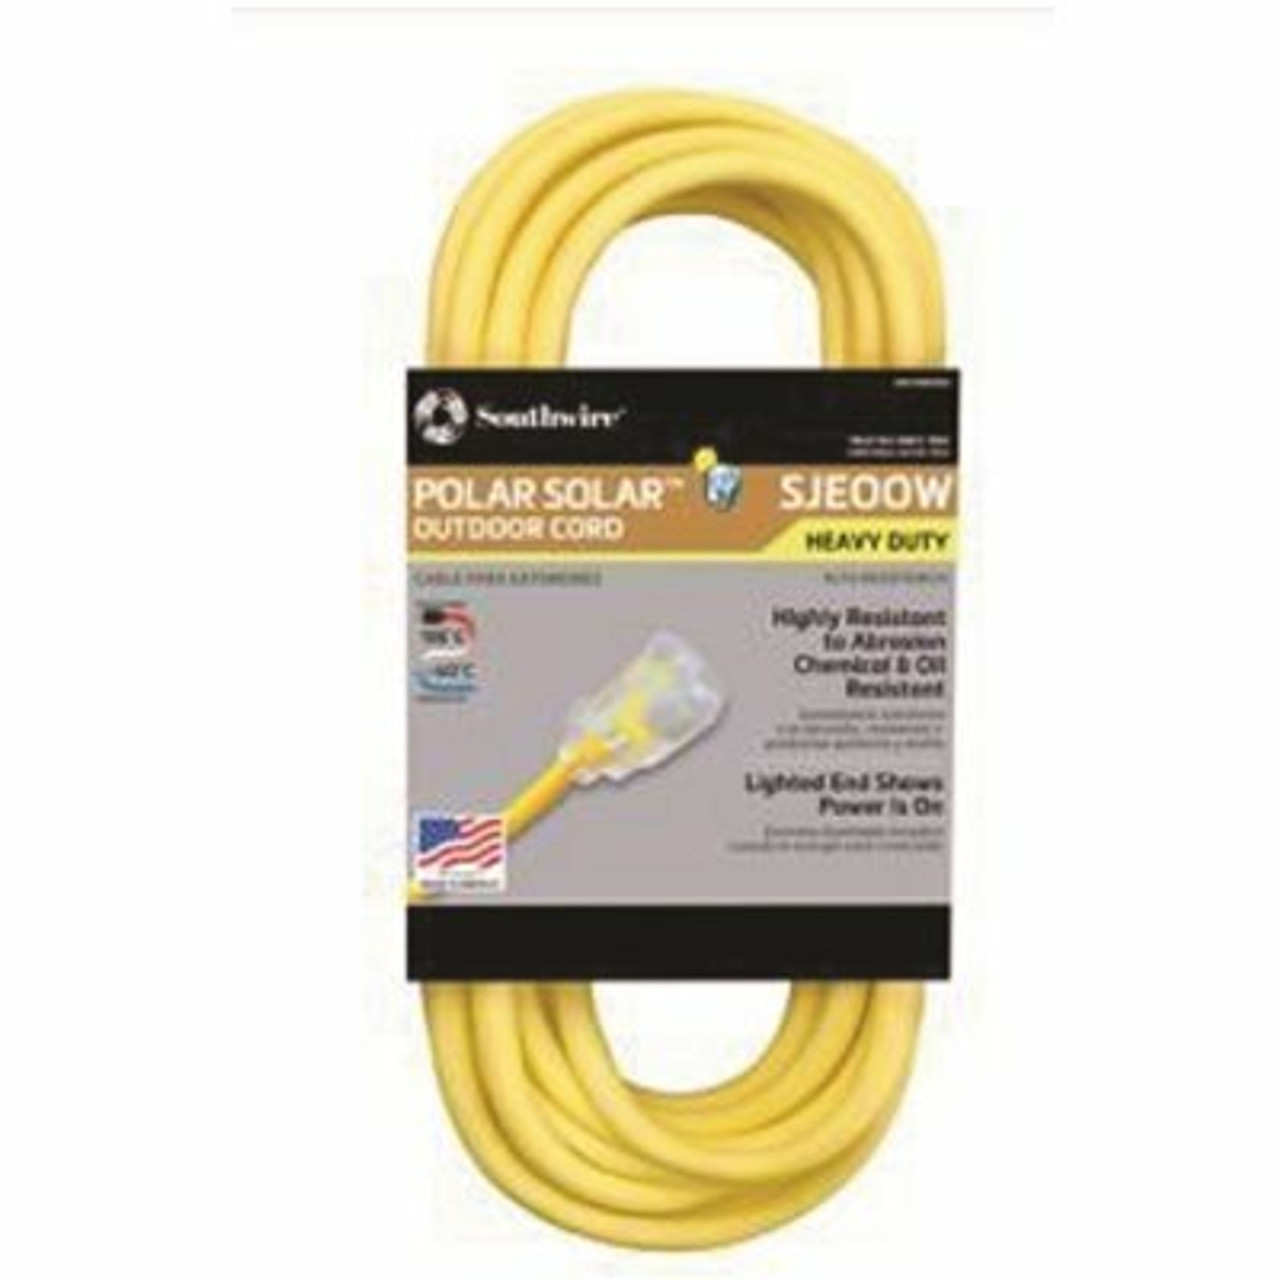 Southwire 100 Ft. 10/3 Sjeow Outdoor Heavy-Duty T-Prene Extension Cord With Power Light Plug